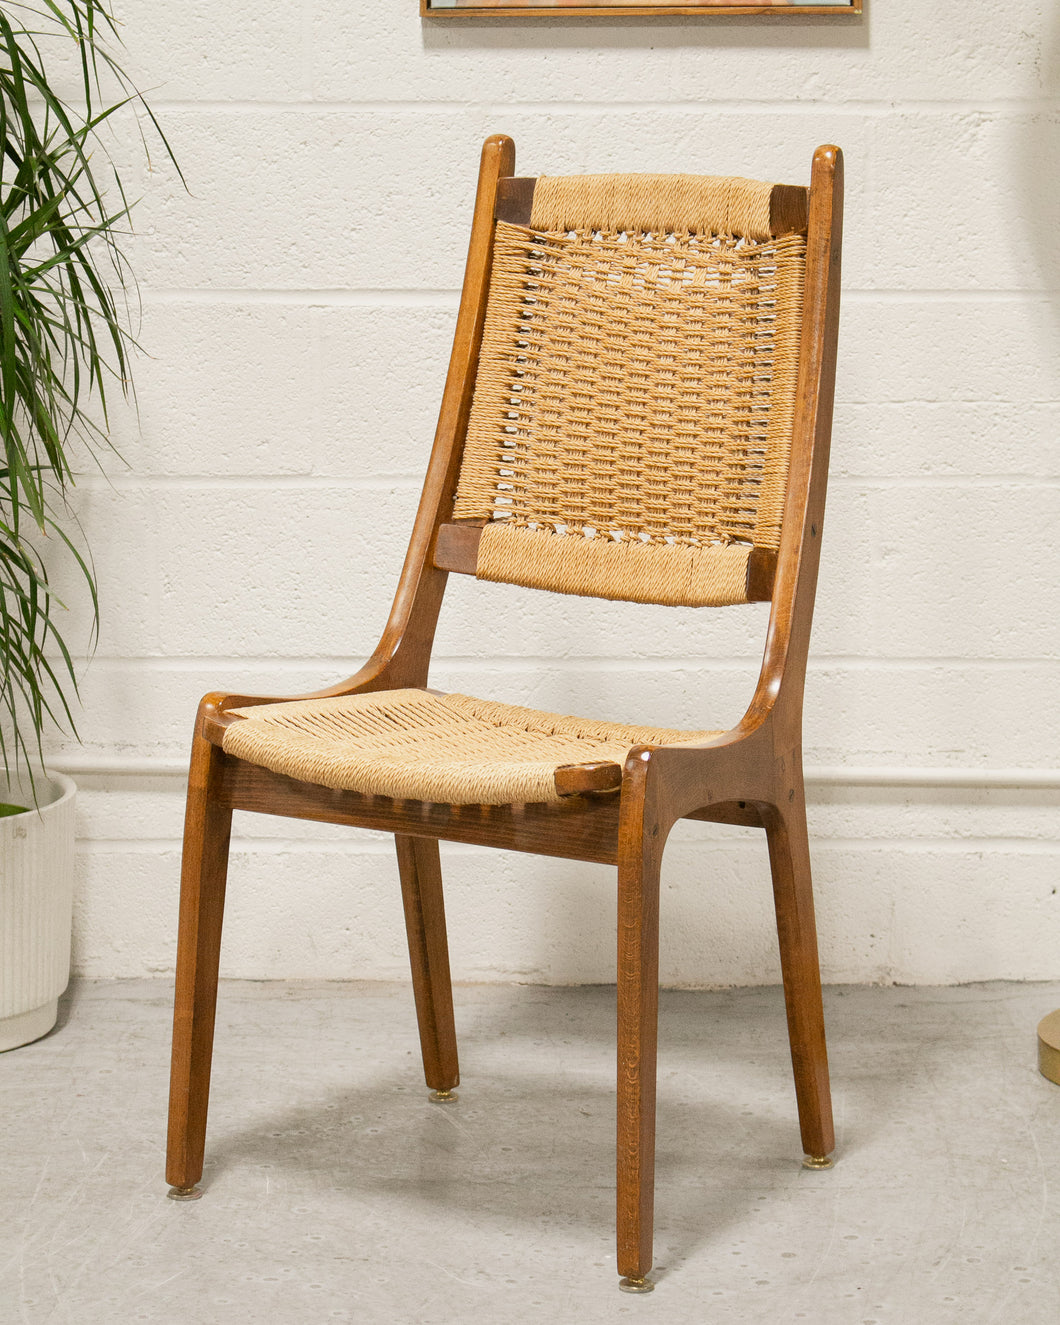 Vintage Chair with Caning